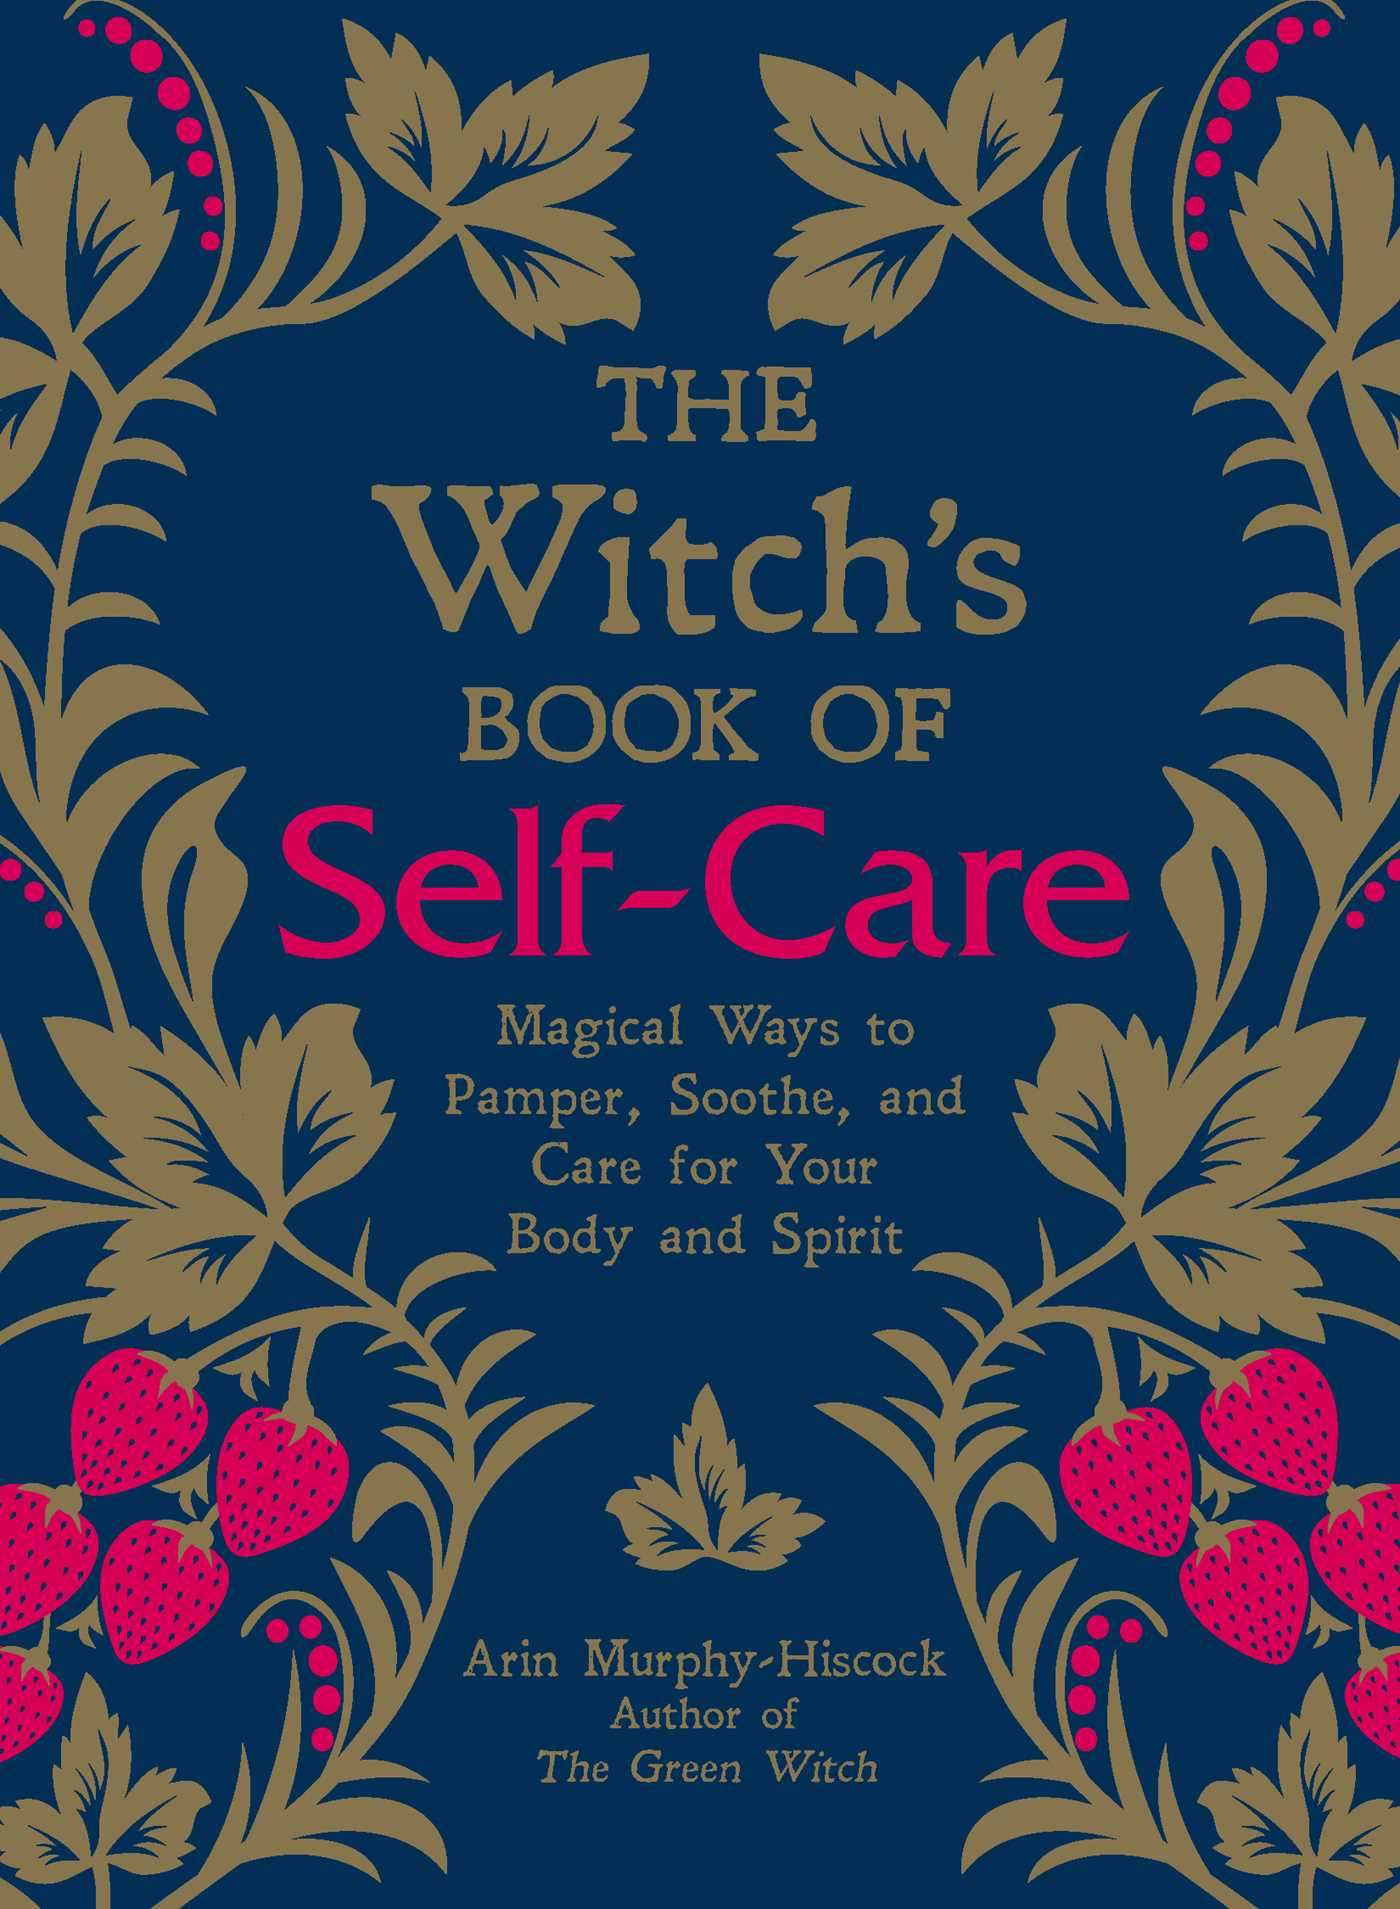 Book cover of "The Witch’s Book of Self-Care," featuring mystical symbols and vibrant colors. The title is prominent, and the imagery suggests magical ways to pamper and care for the body and spirit.